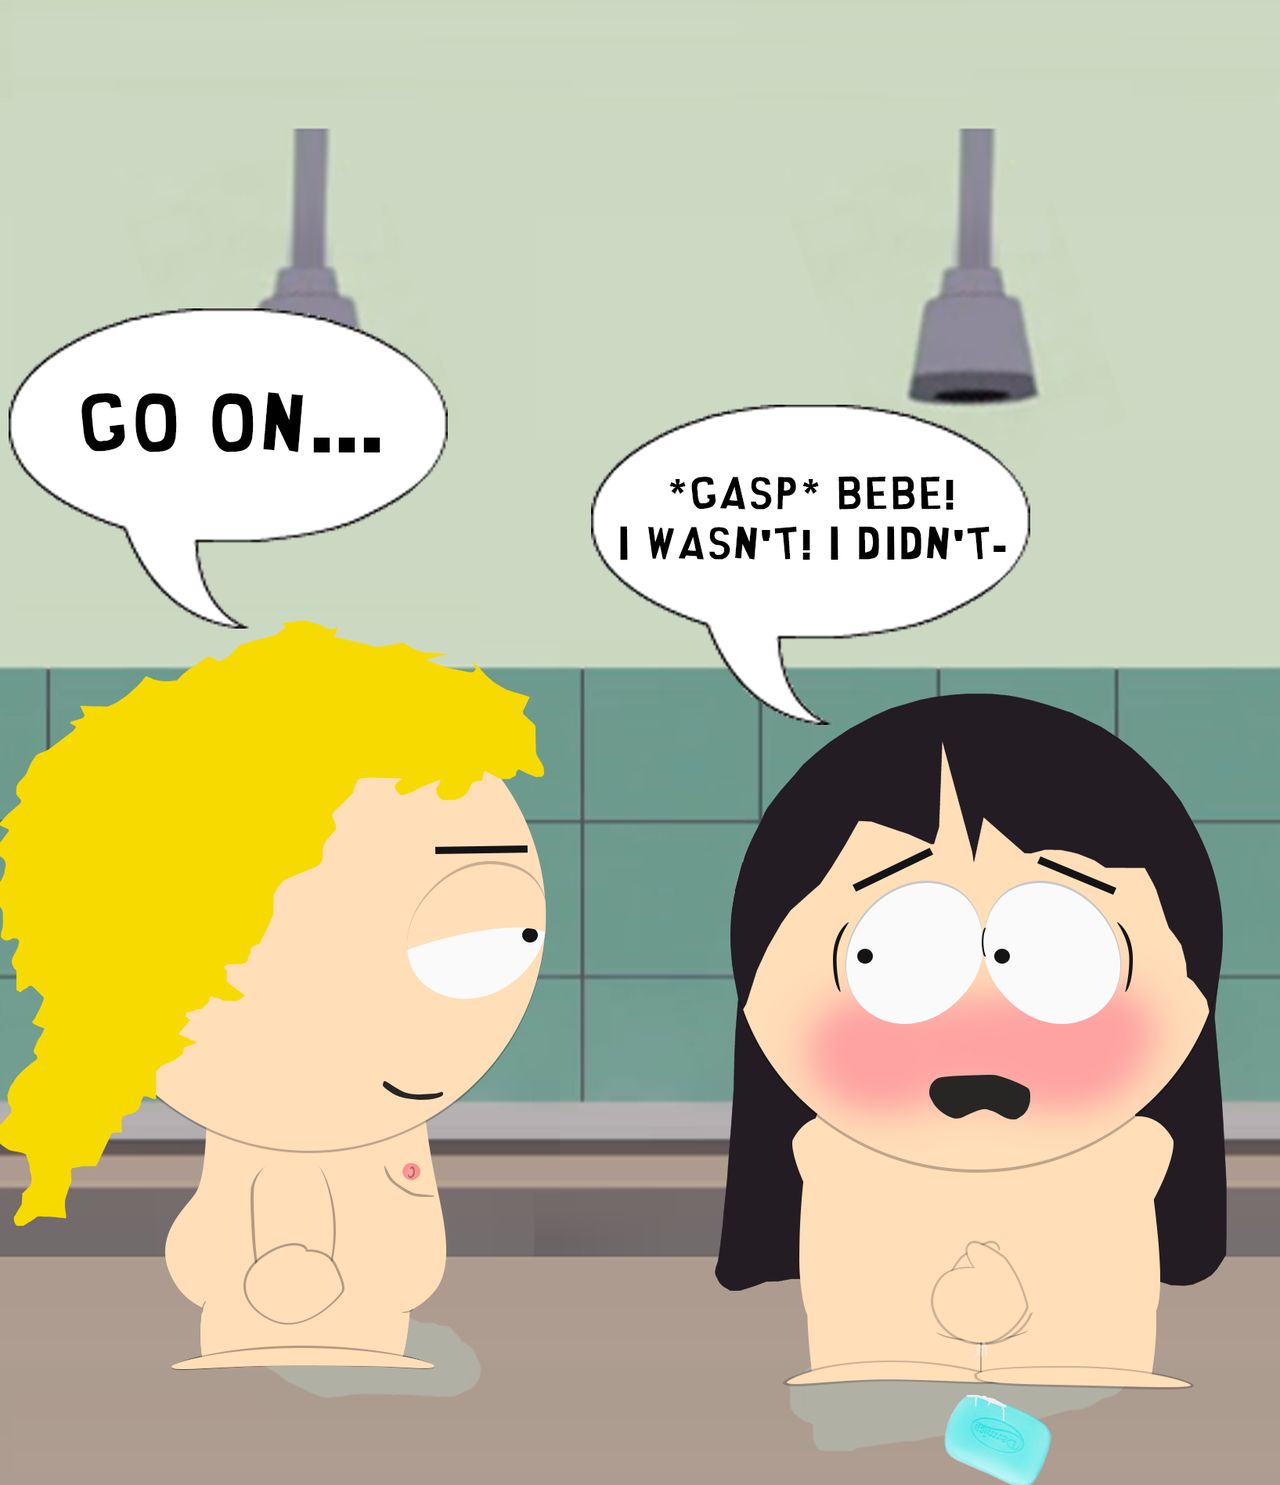 NAUGHTY CHEERLEADERS（south park） - Page 6 - HentaiEra